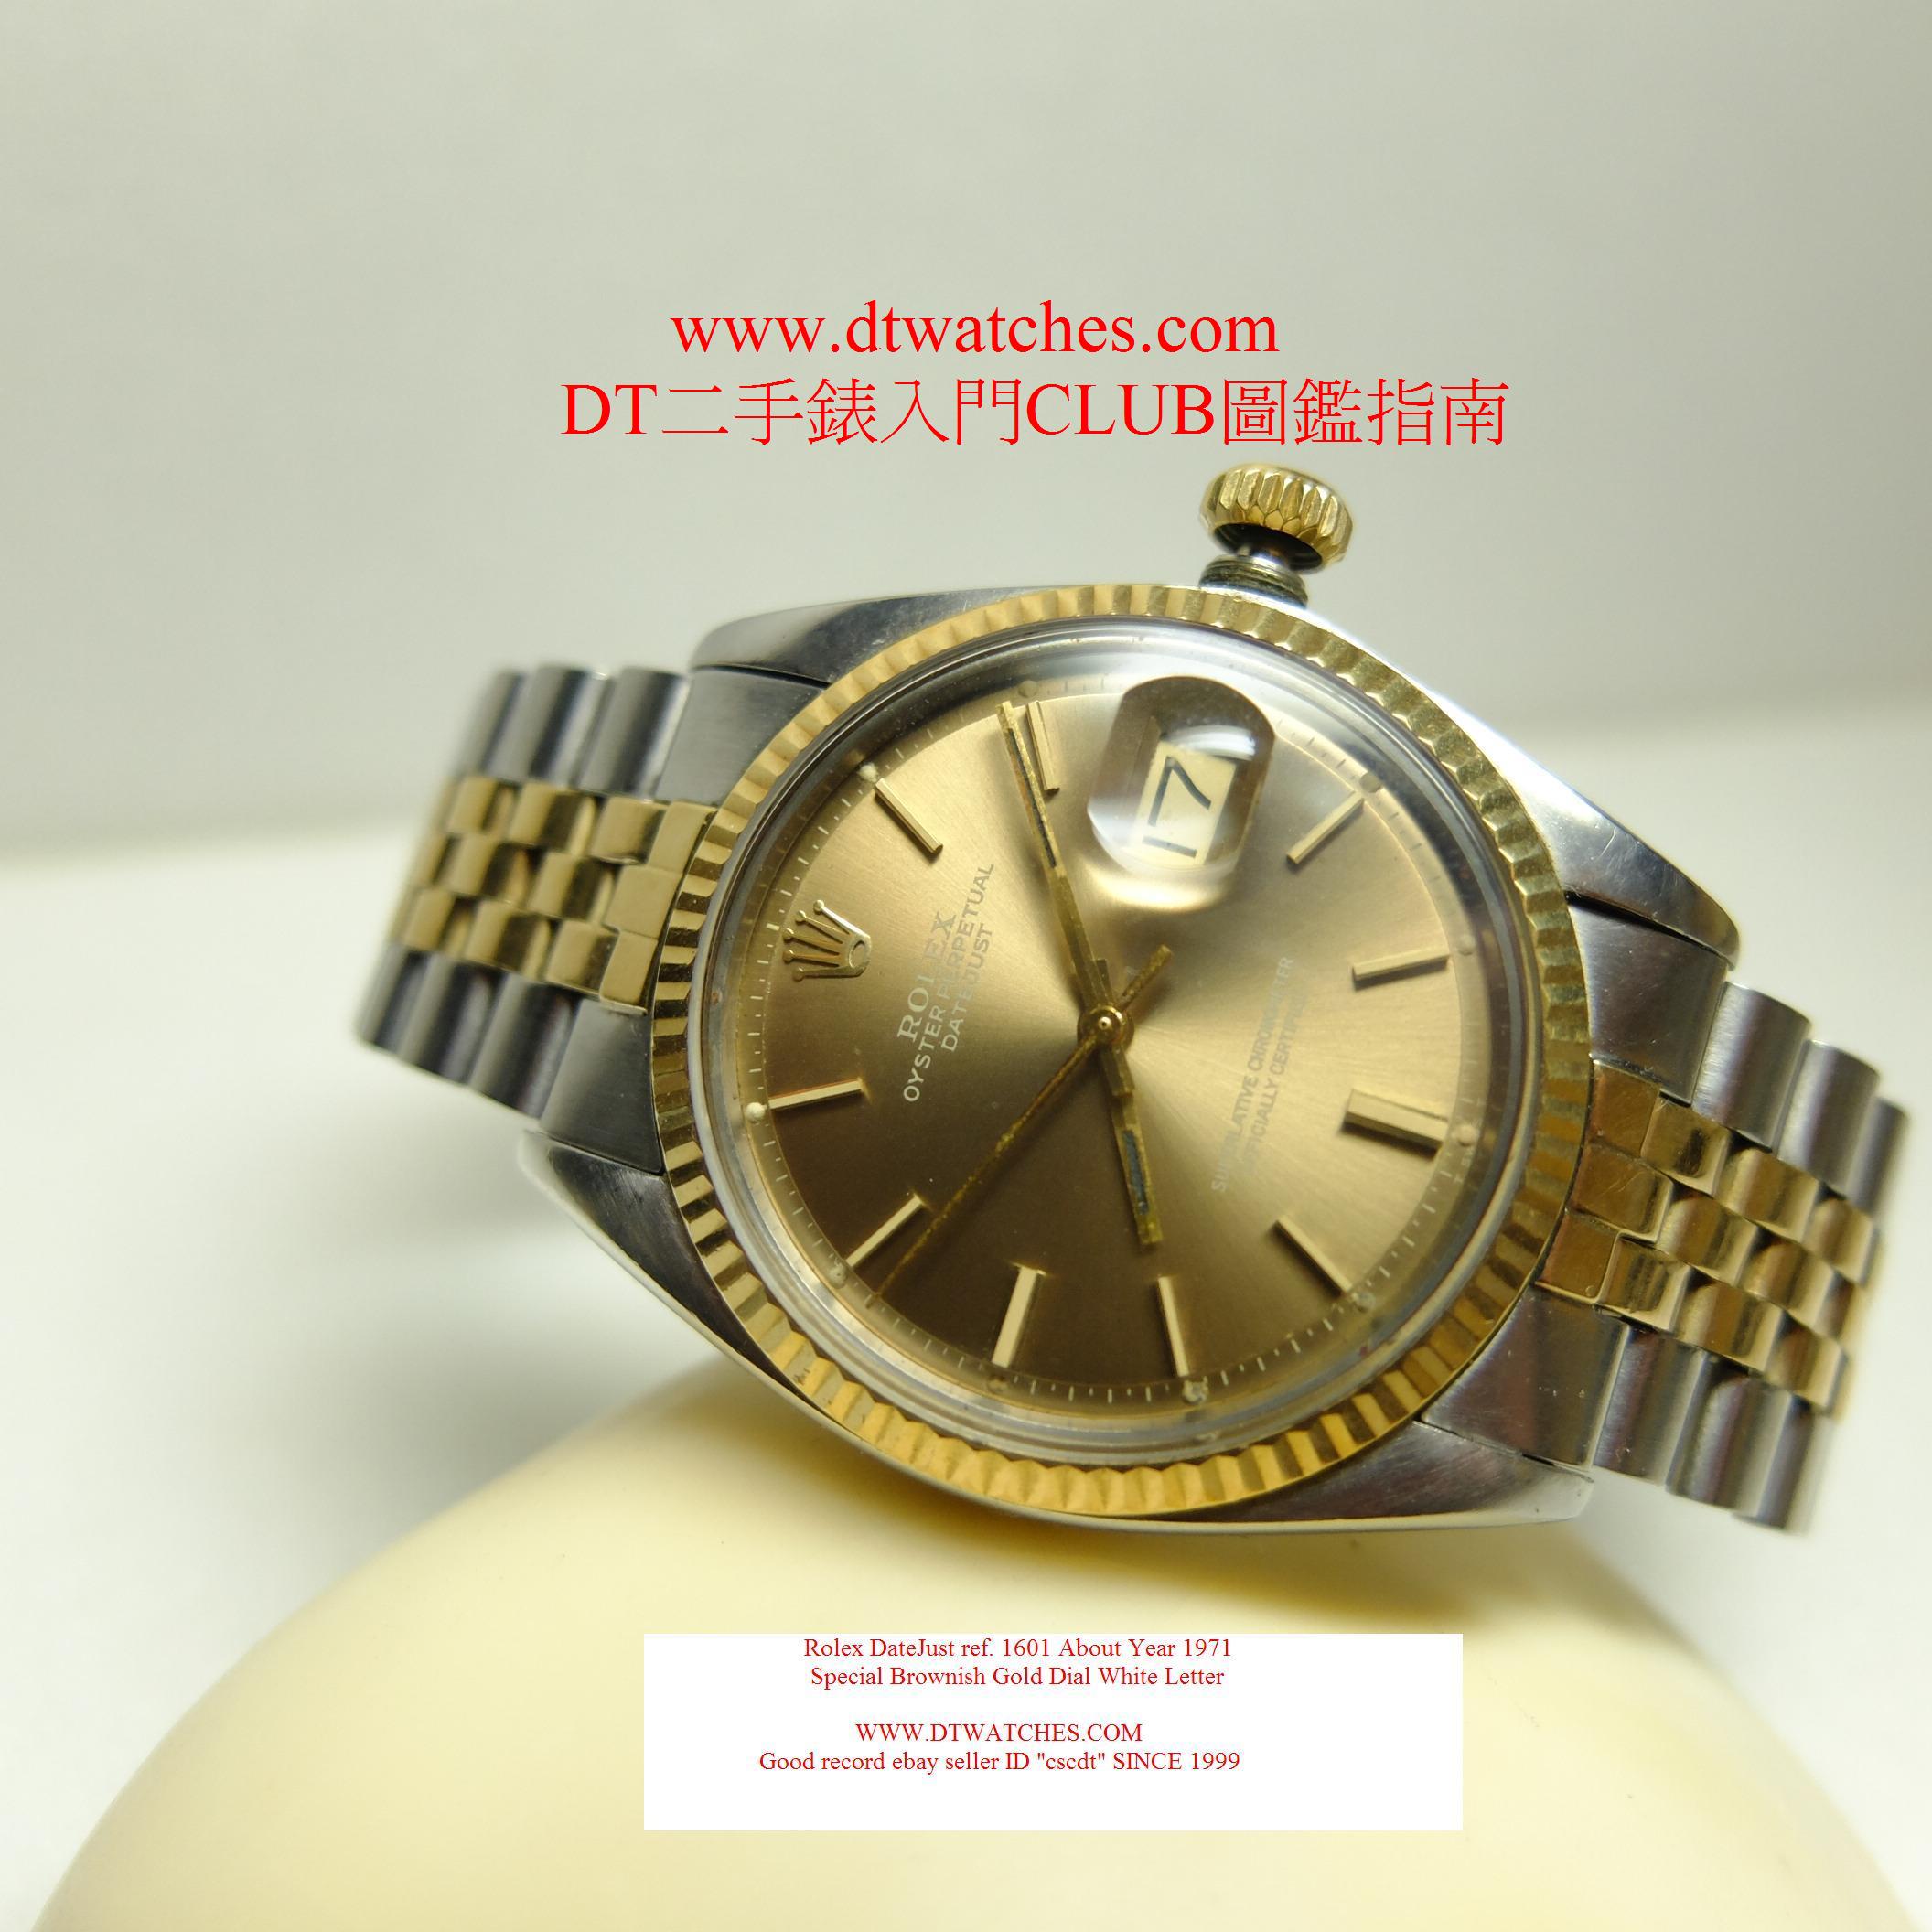 About 1971 Rolex DateJust ref 1601 Glossy Brown Dial white Letters